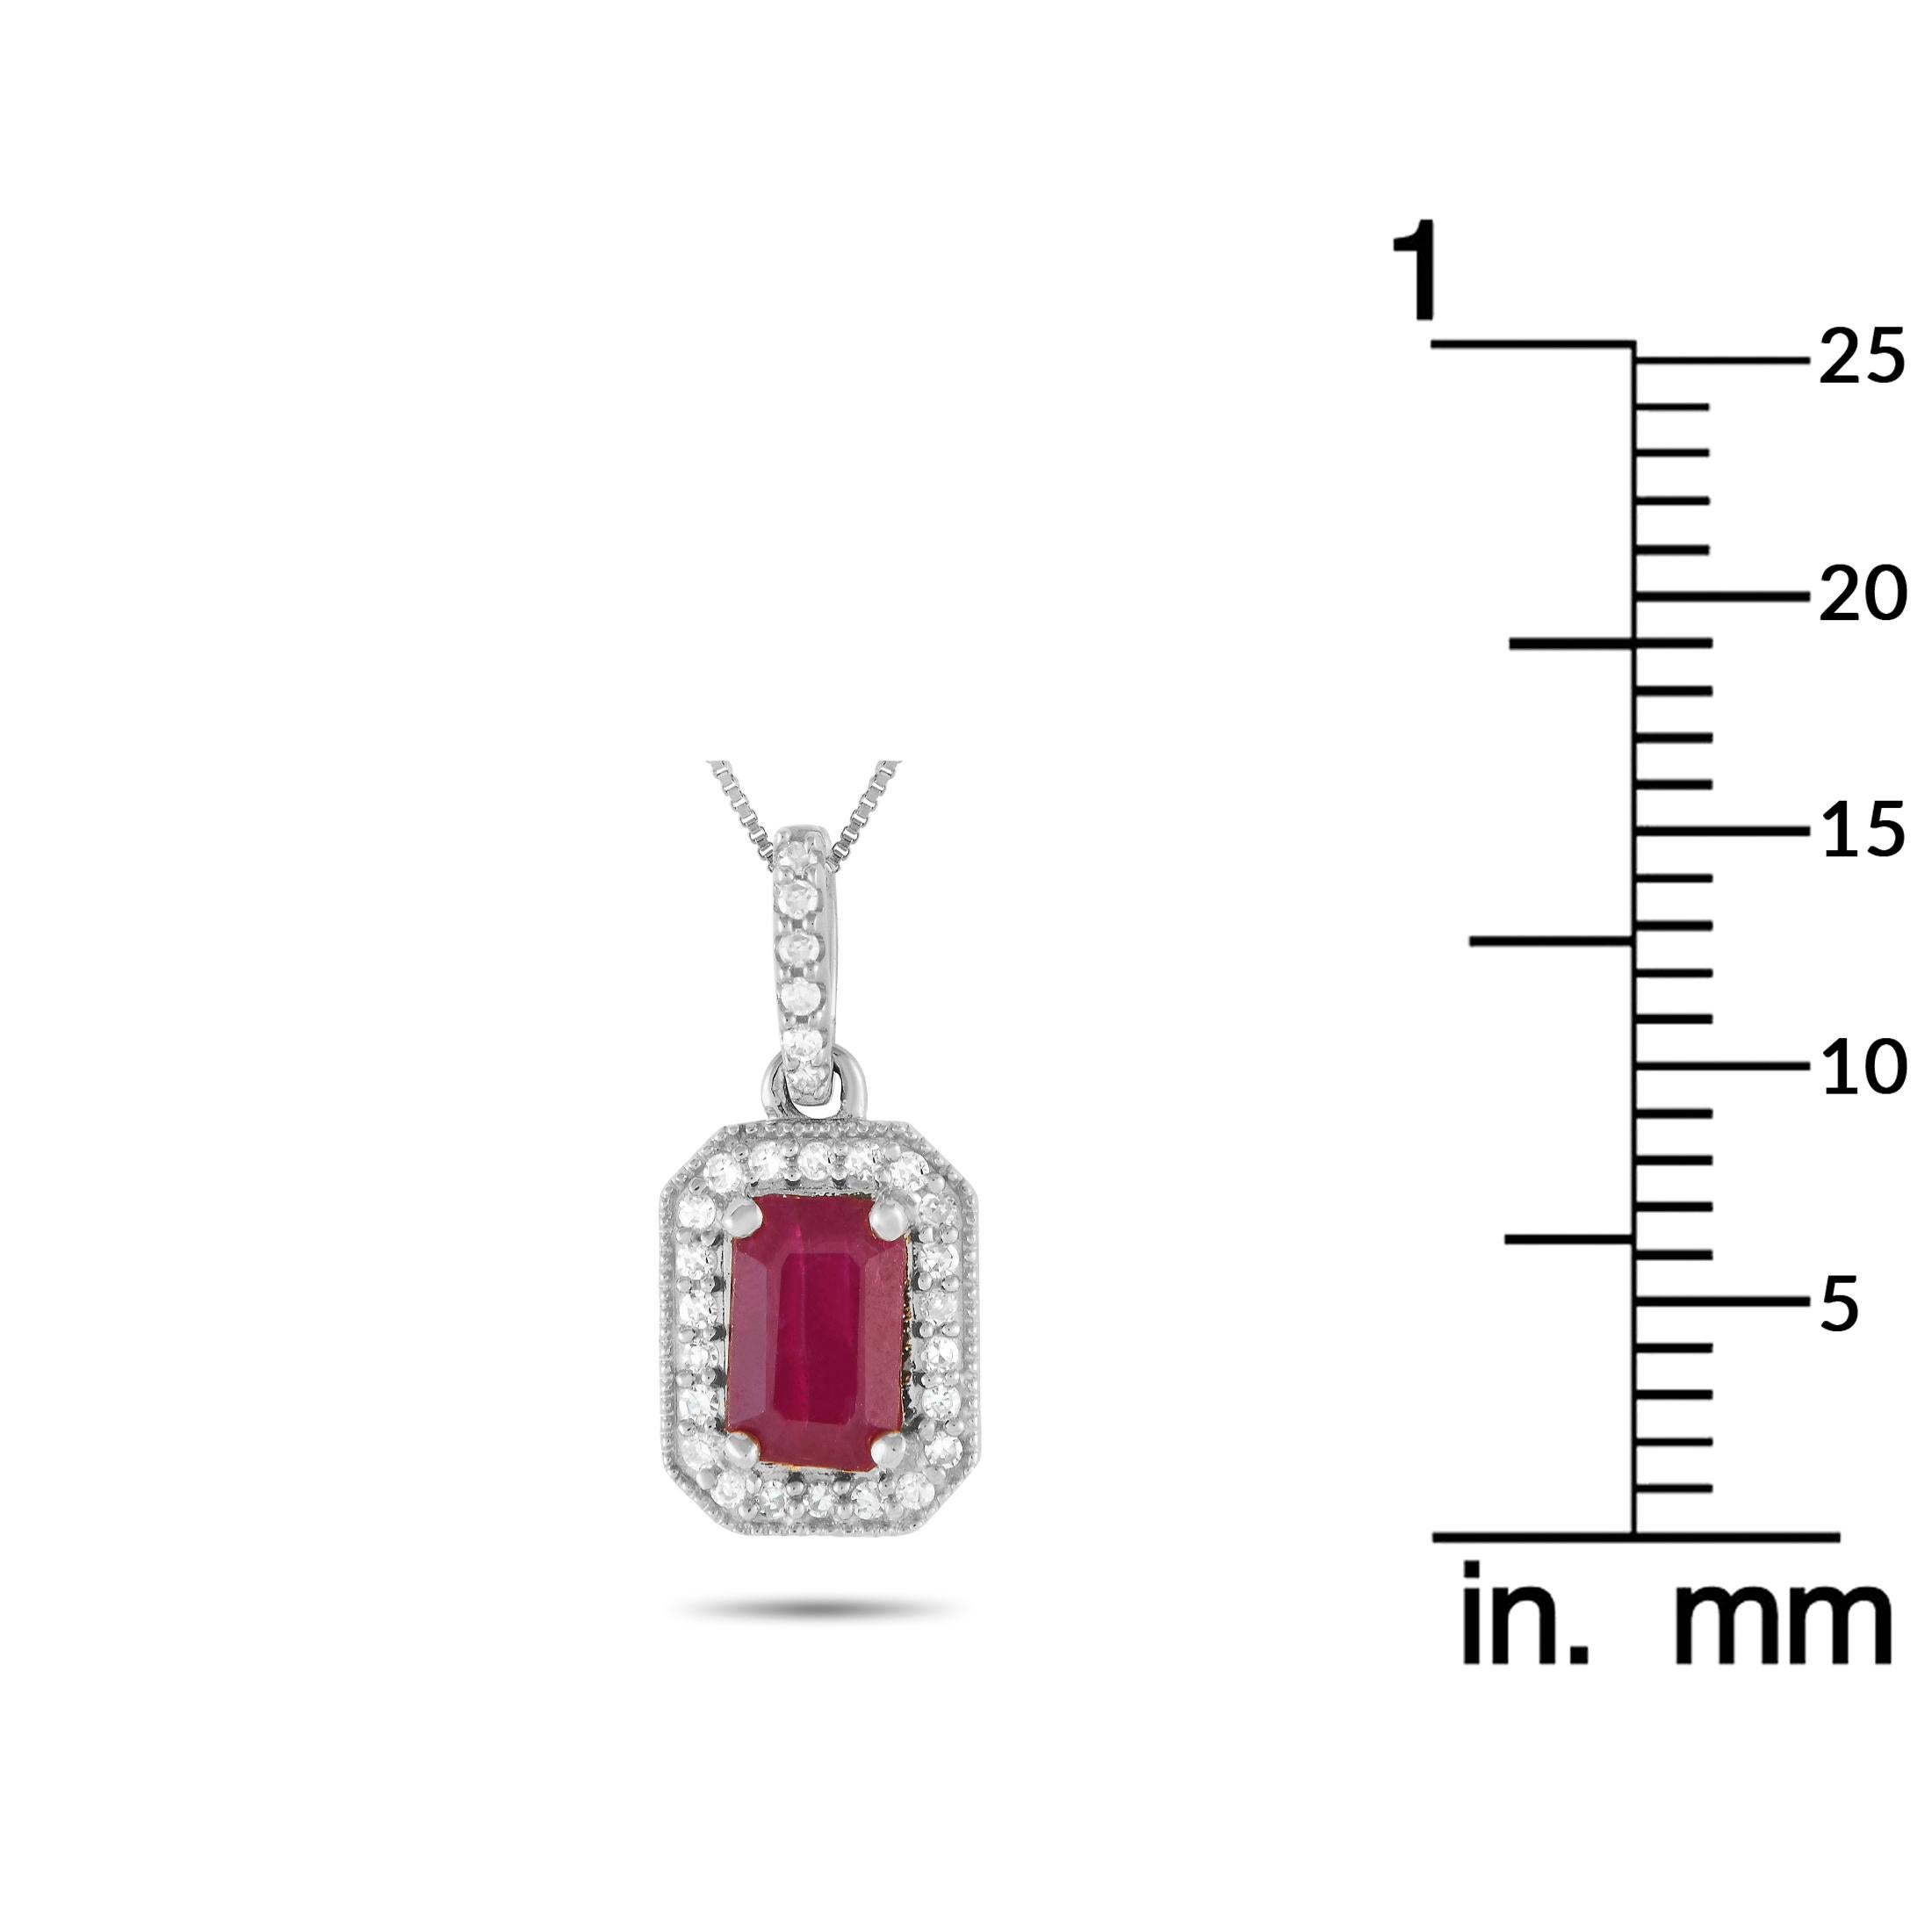 LB Exclusive 14K White Gold 0.10ct Diamond and Ruby Necklace PD4-16050WRU In New Condition For Sale In Southampton, PA